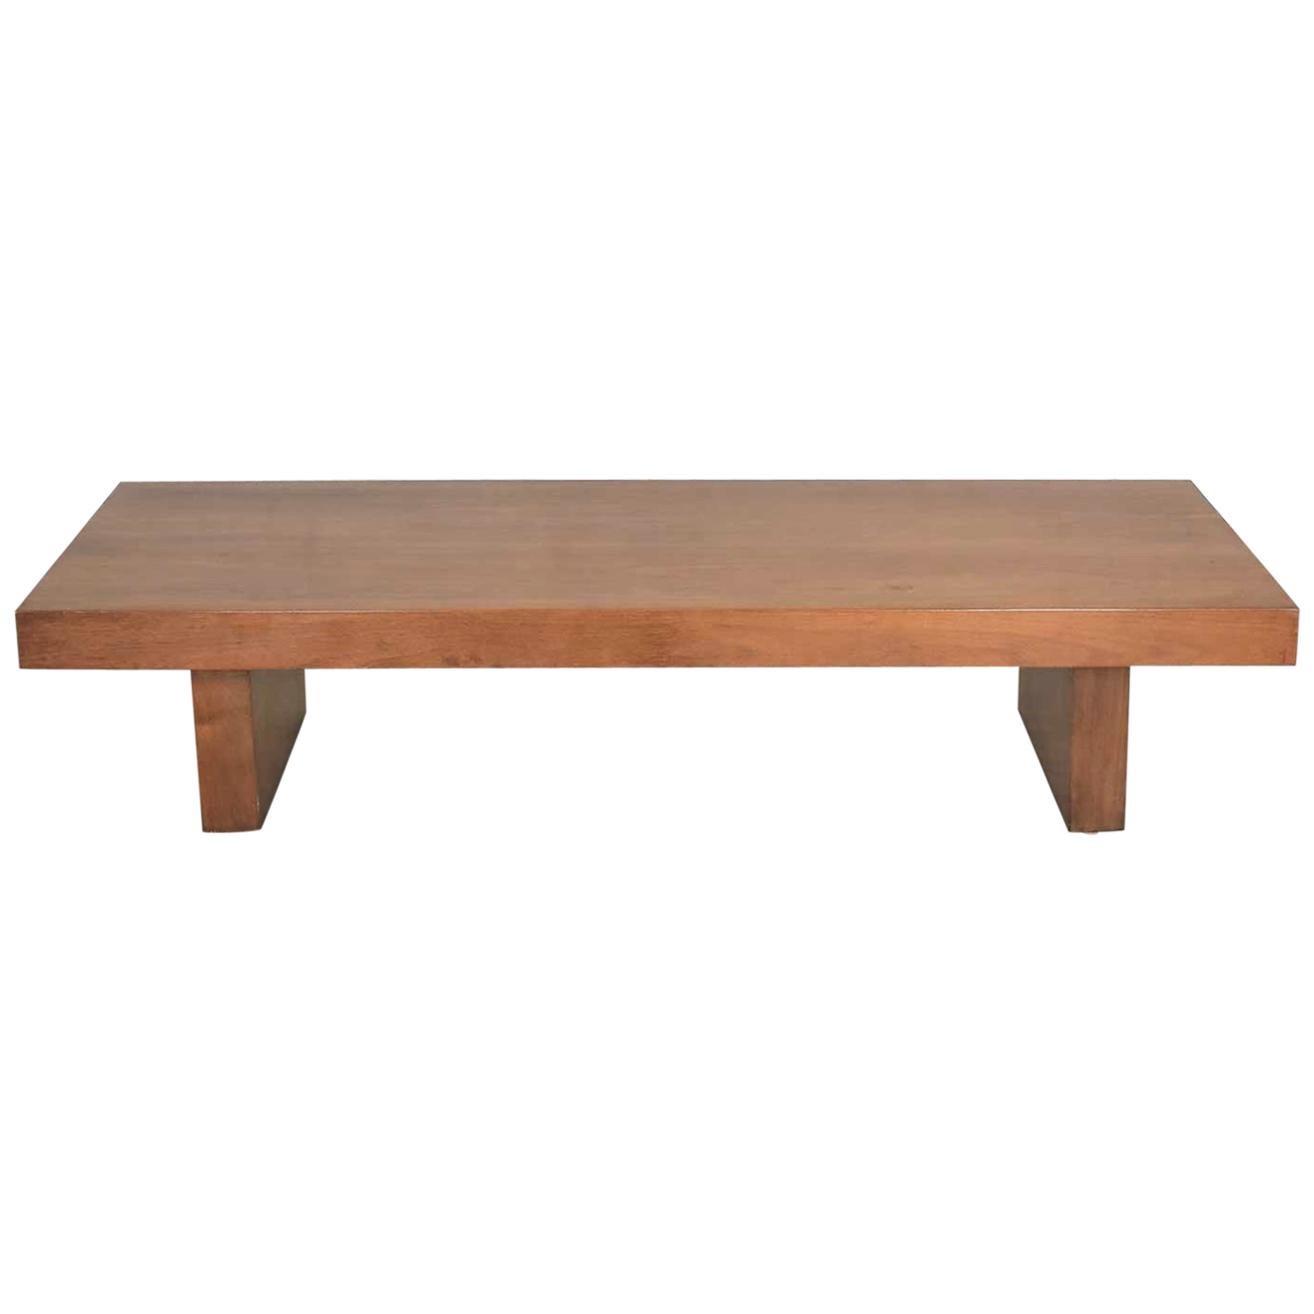 Show-Pieces Mid-Century Modern Asian Low Coffee Teahouse Table Bench in Walnut